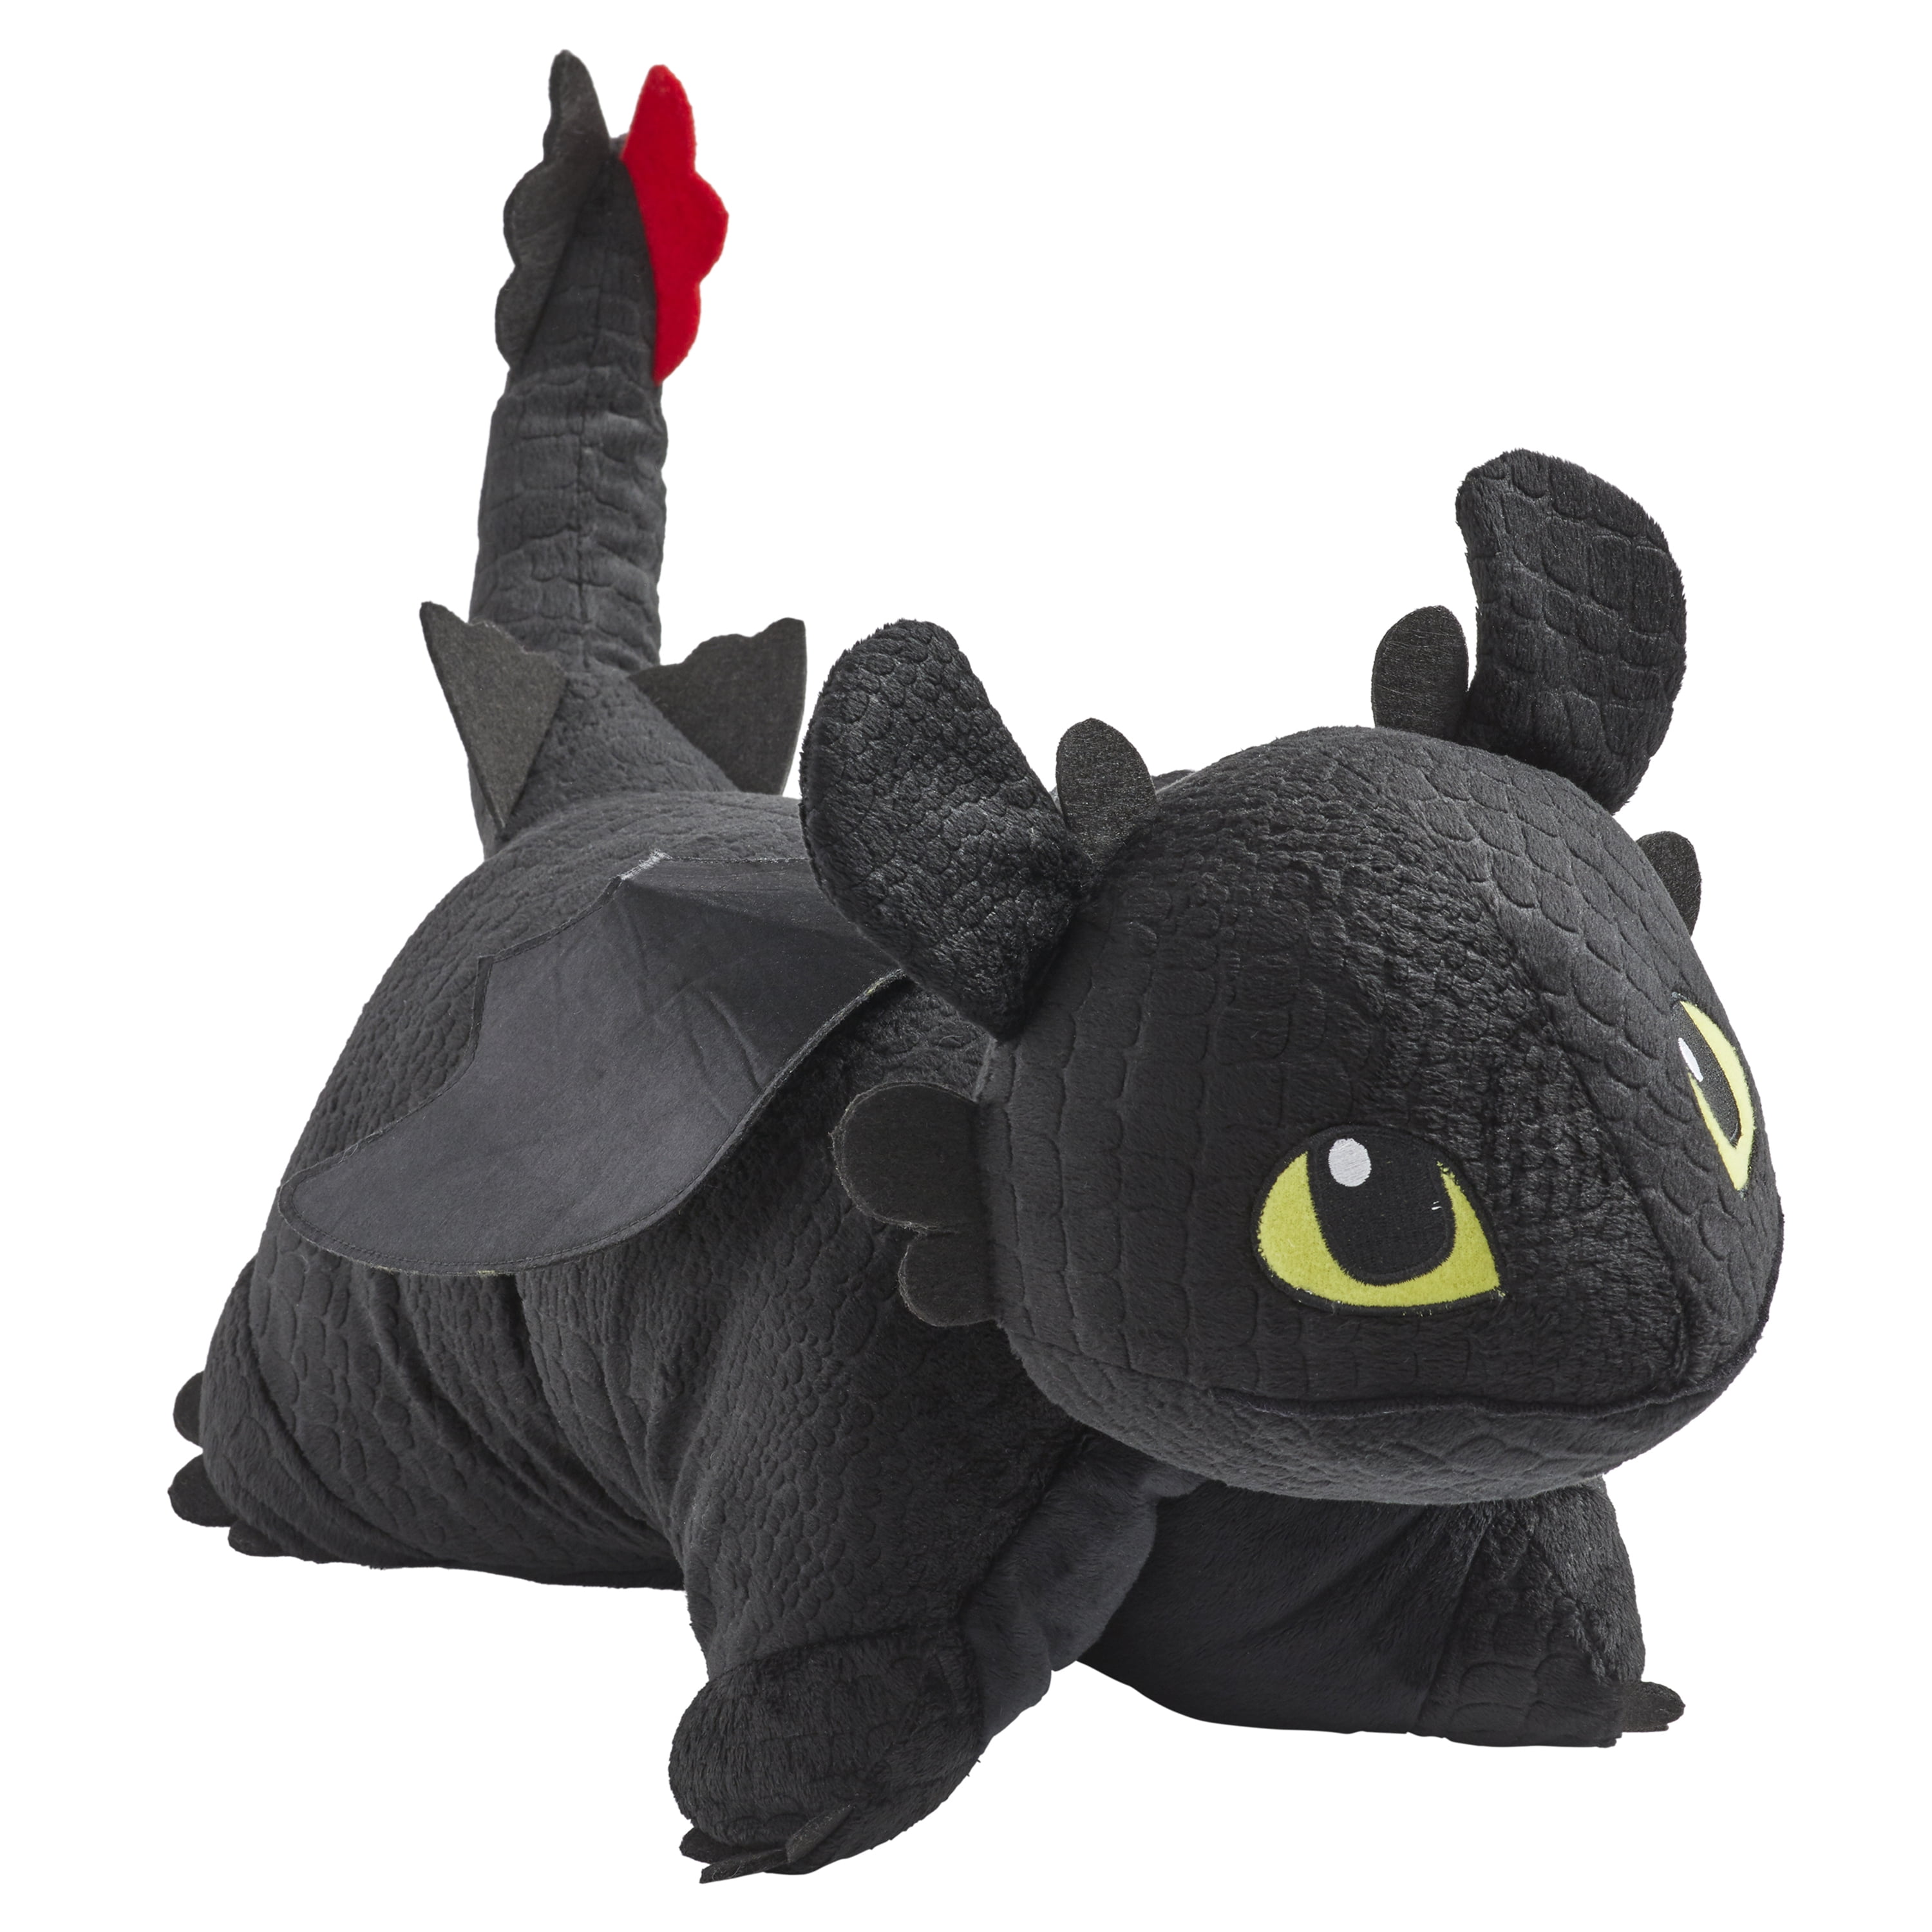 Pillow Pets NBCUniversal How to Train Your Dragon Toothless 16 Stuffed Animal Plush Toy